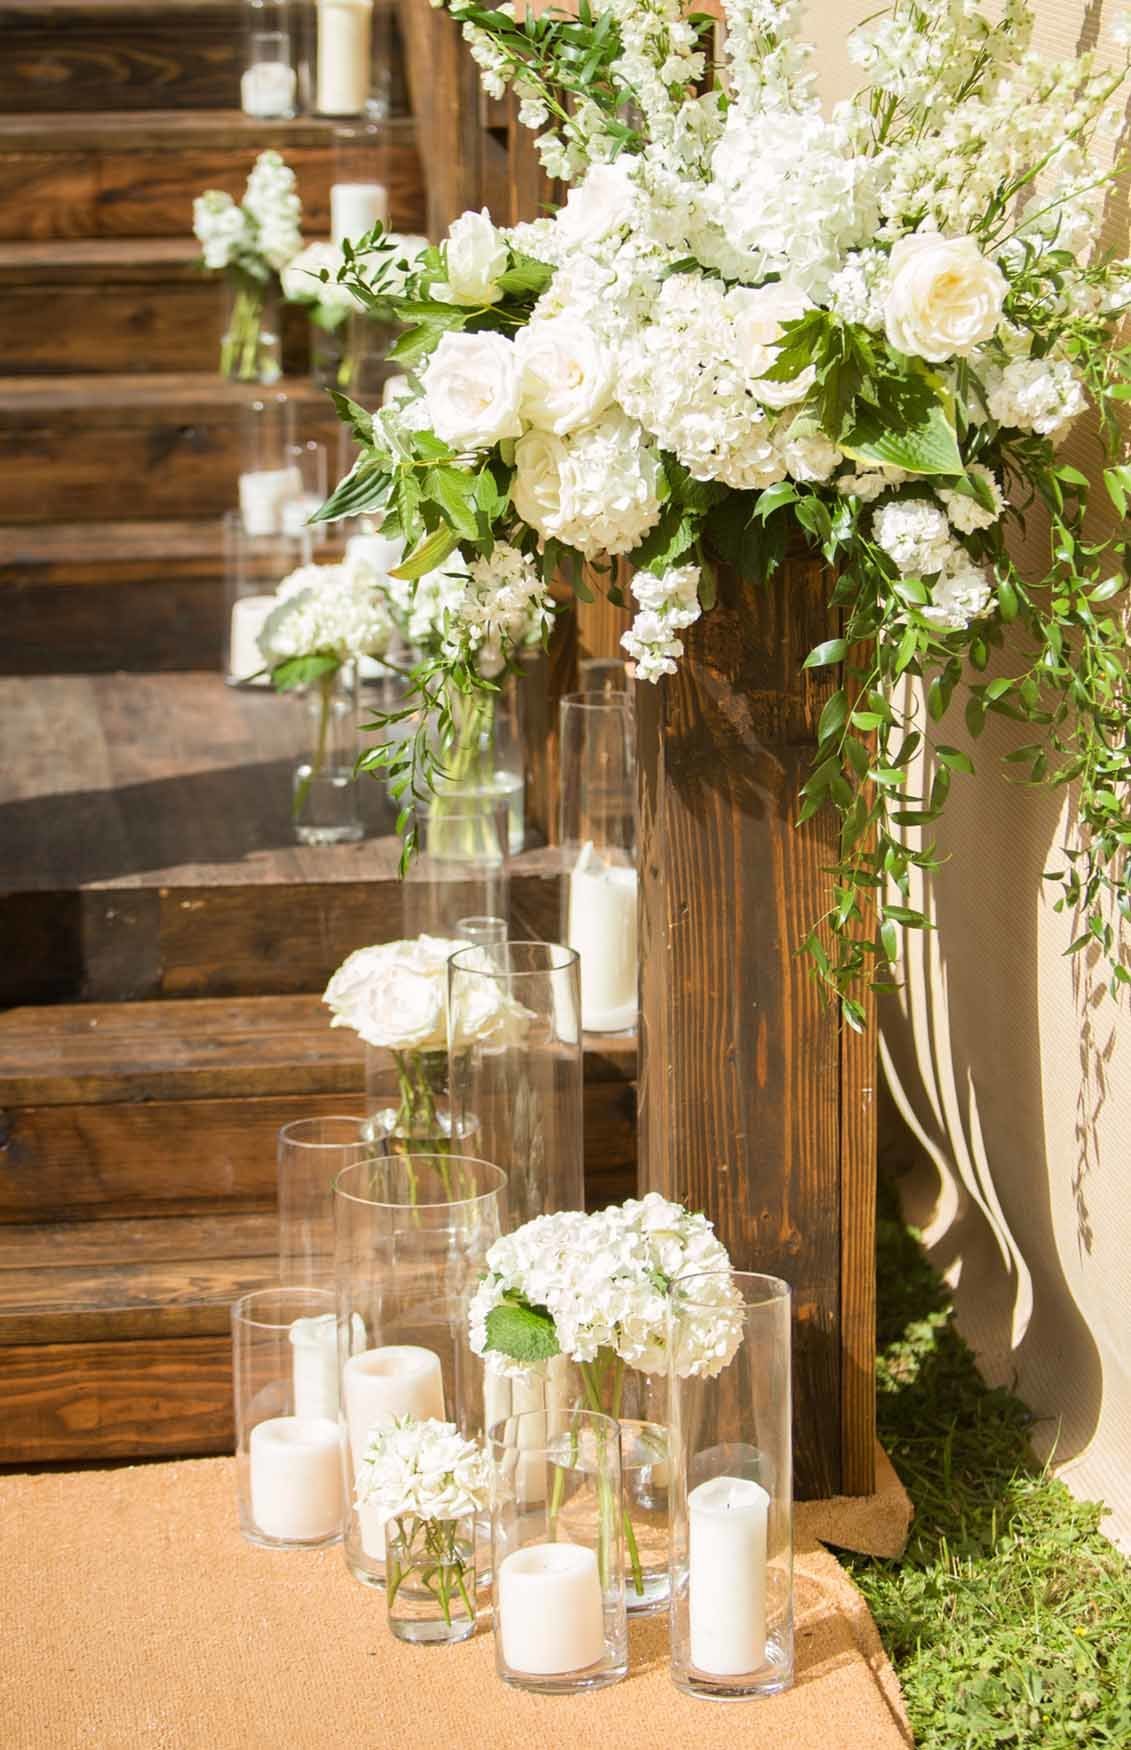 Large white flower arrangement and candles on a wooden staircase